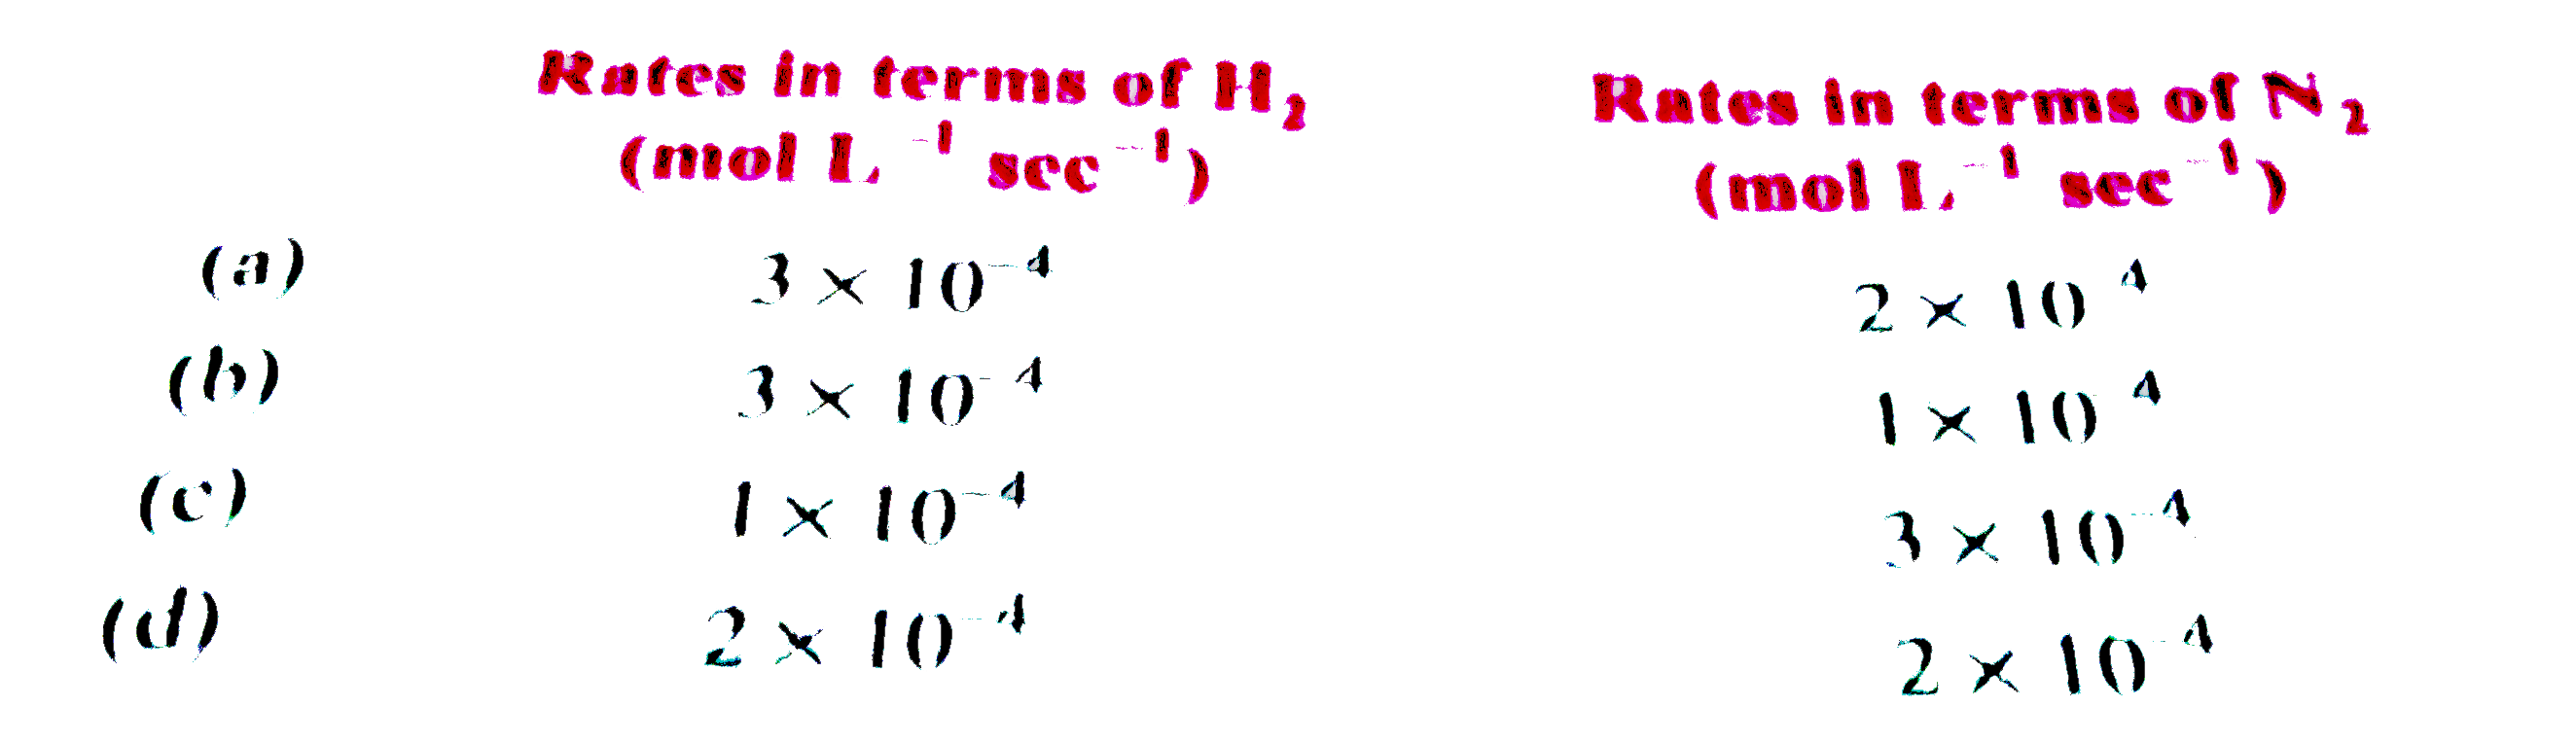 In the hober's process of ammonia manufacture,   N(2)(g)+3H(2)(g) rarr2NH(3)(g)   the rate of appearance of NH(3) is :   (d[NH(3)])/(dt)=2xx10^(-4)